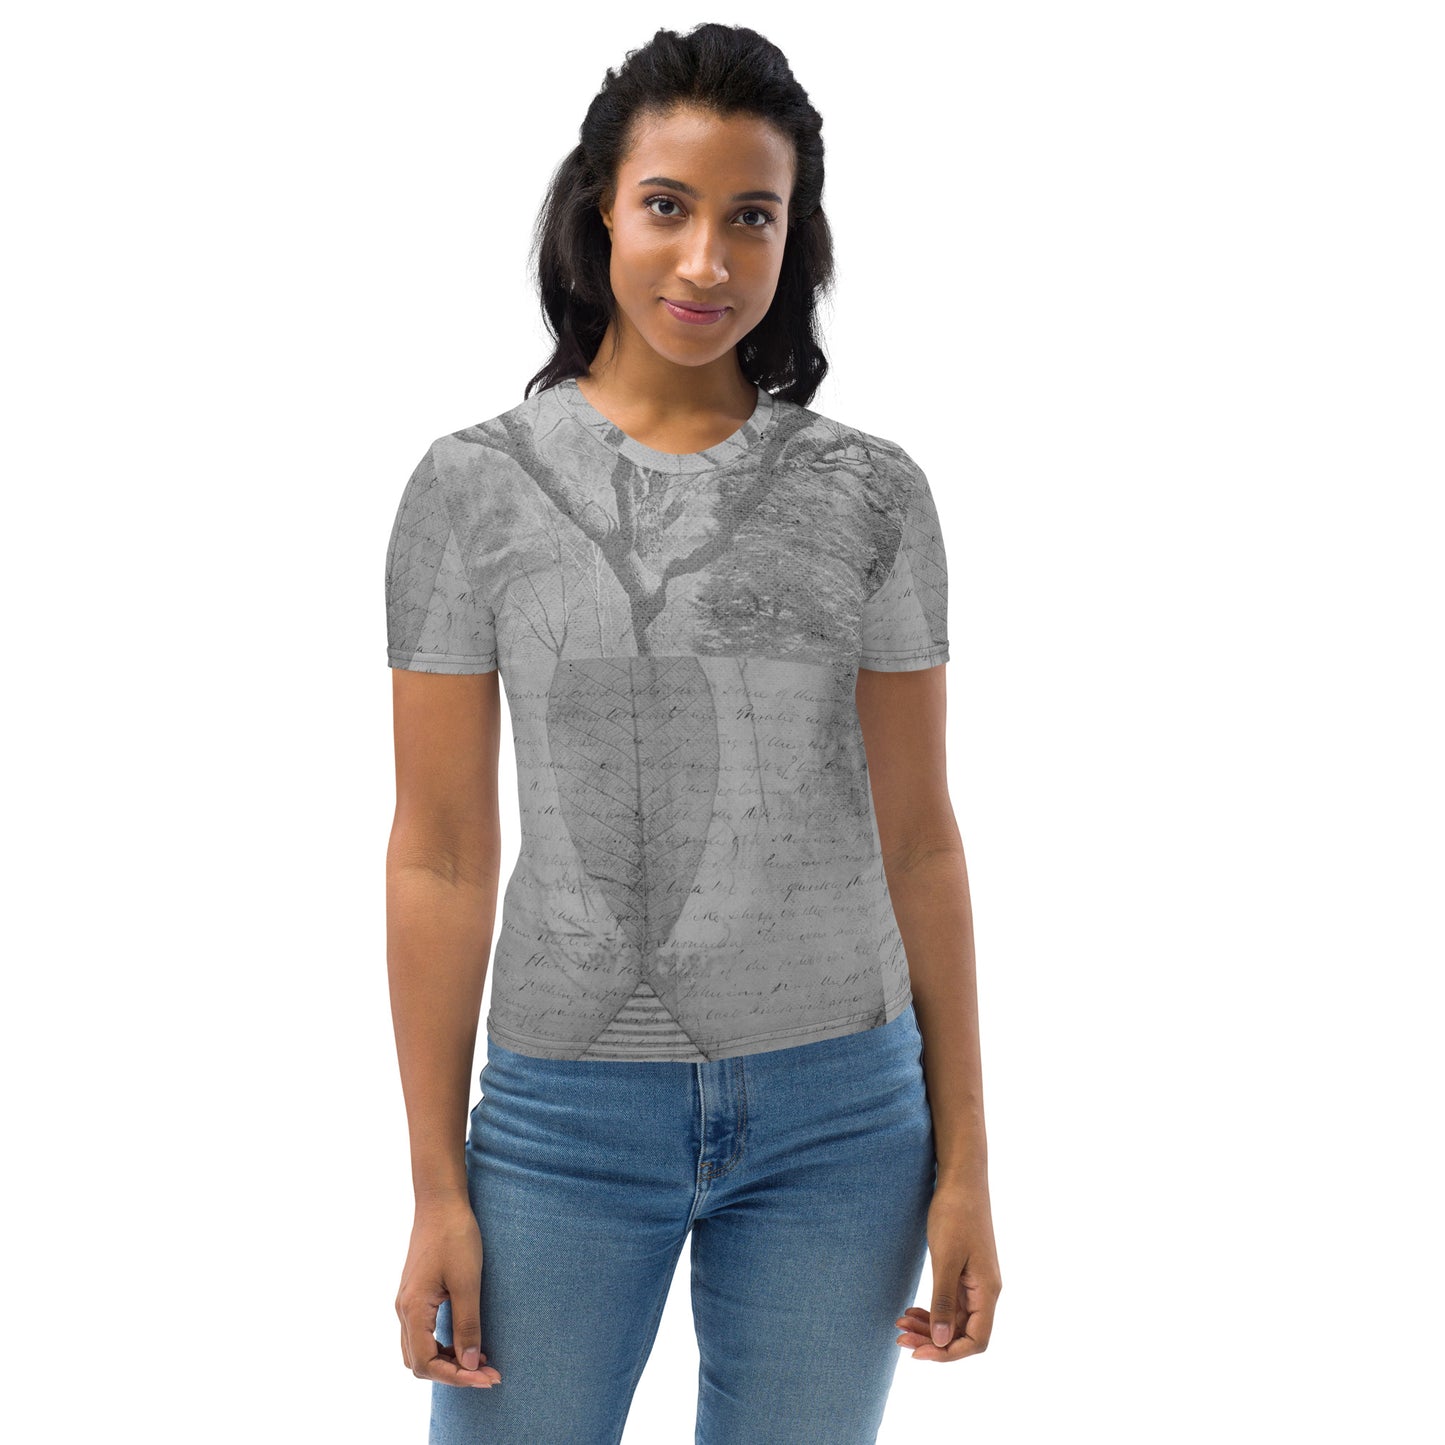 Timelines - Women's Graphic T-shirt